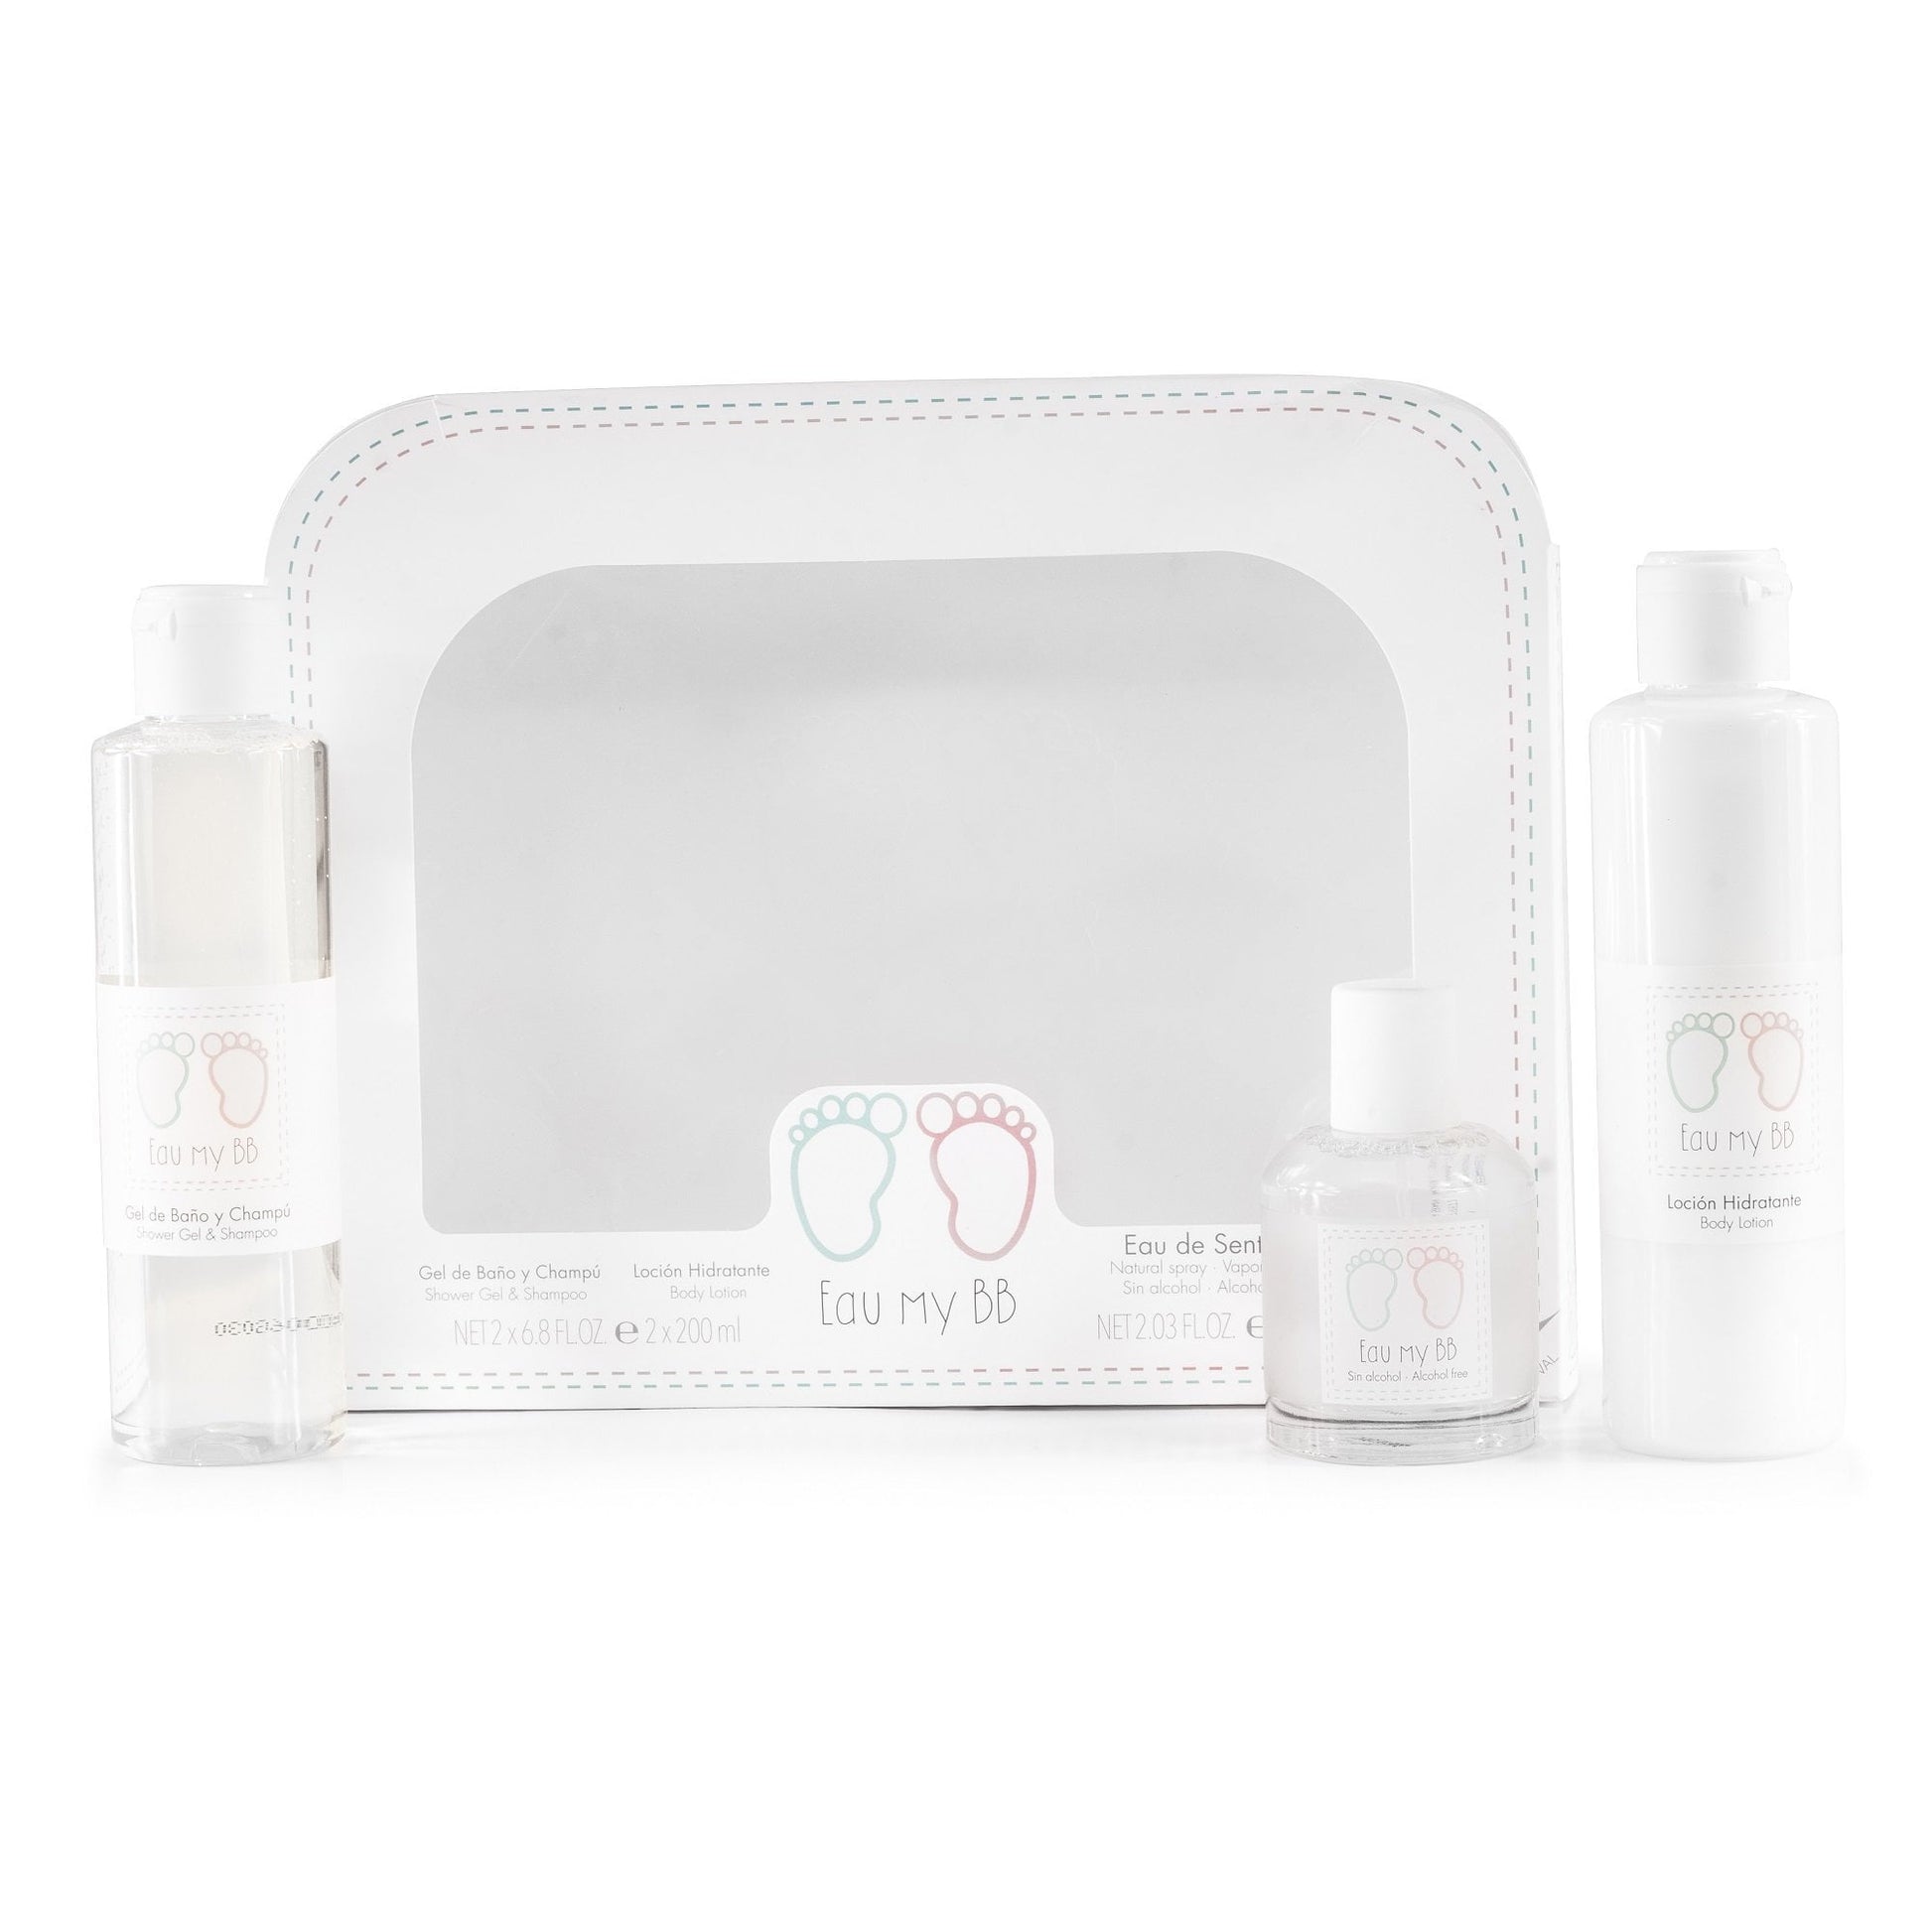 Eau my BB Gift Set for Girls 2.03 oz. Each Click to open in modal